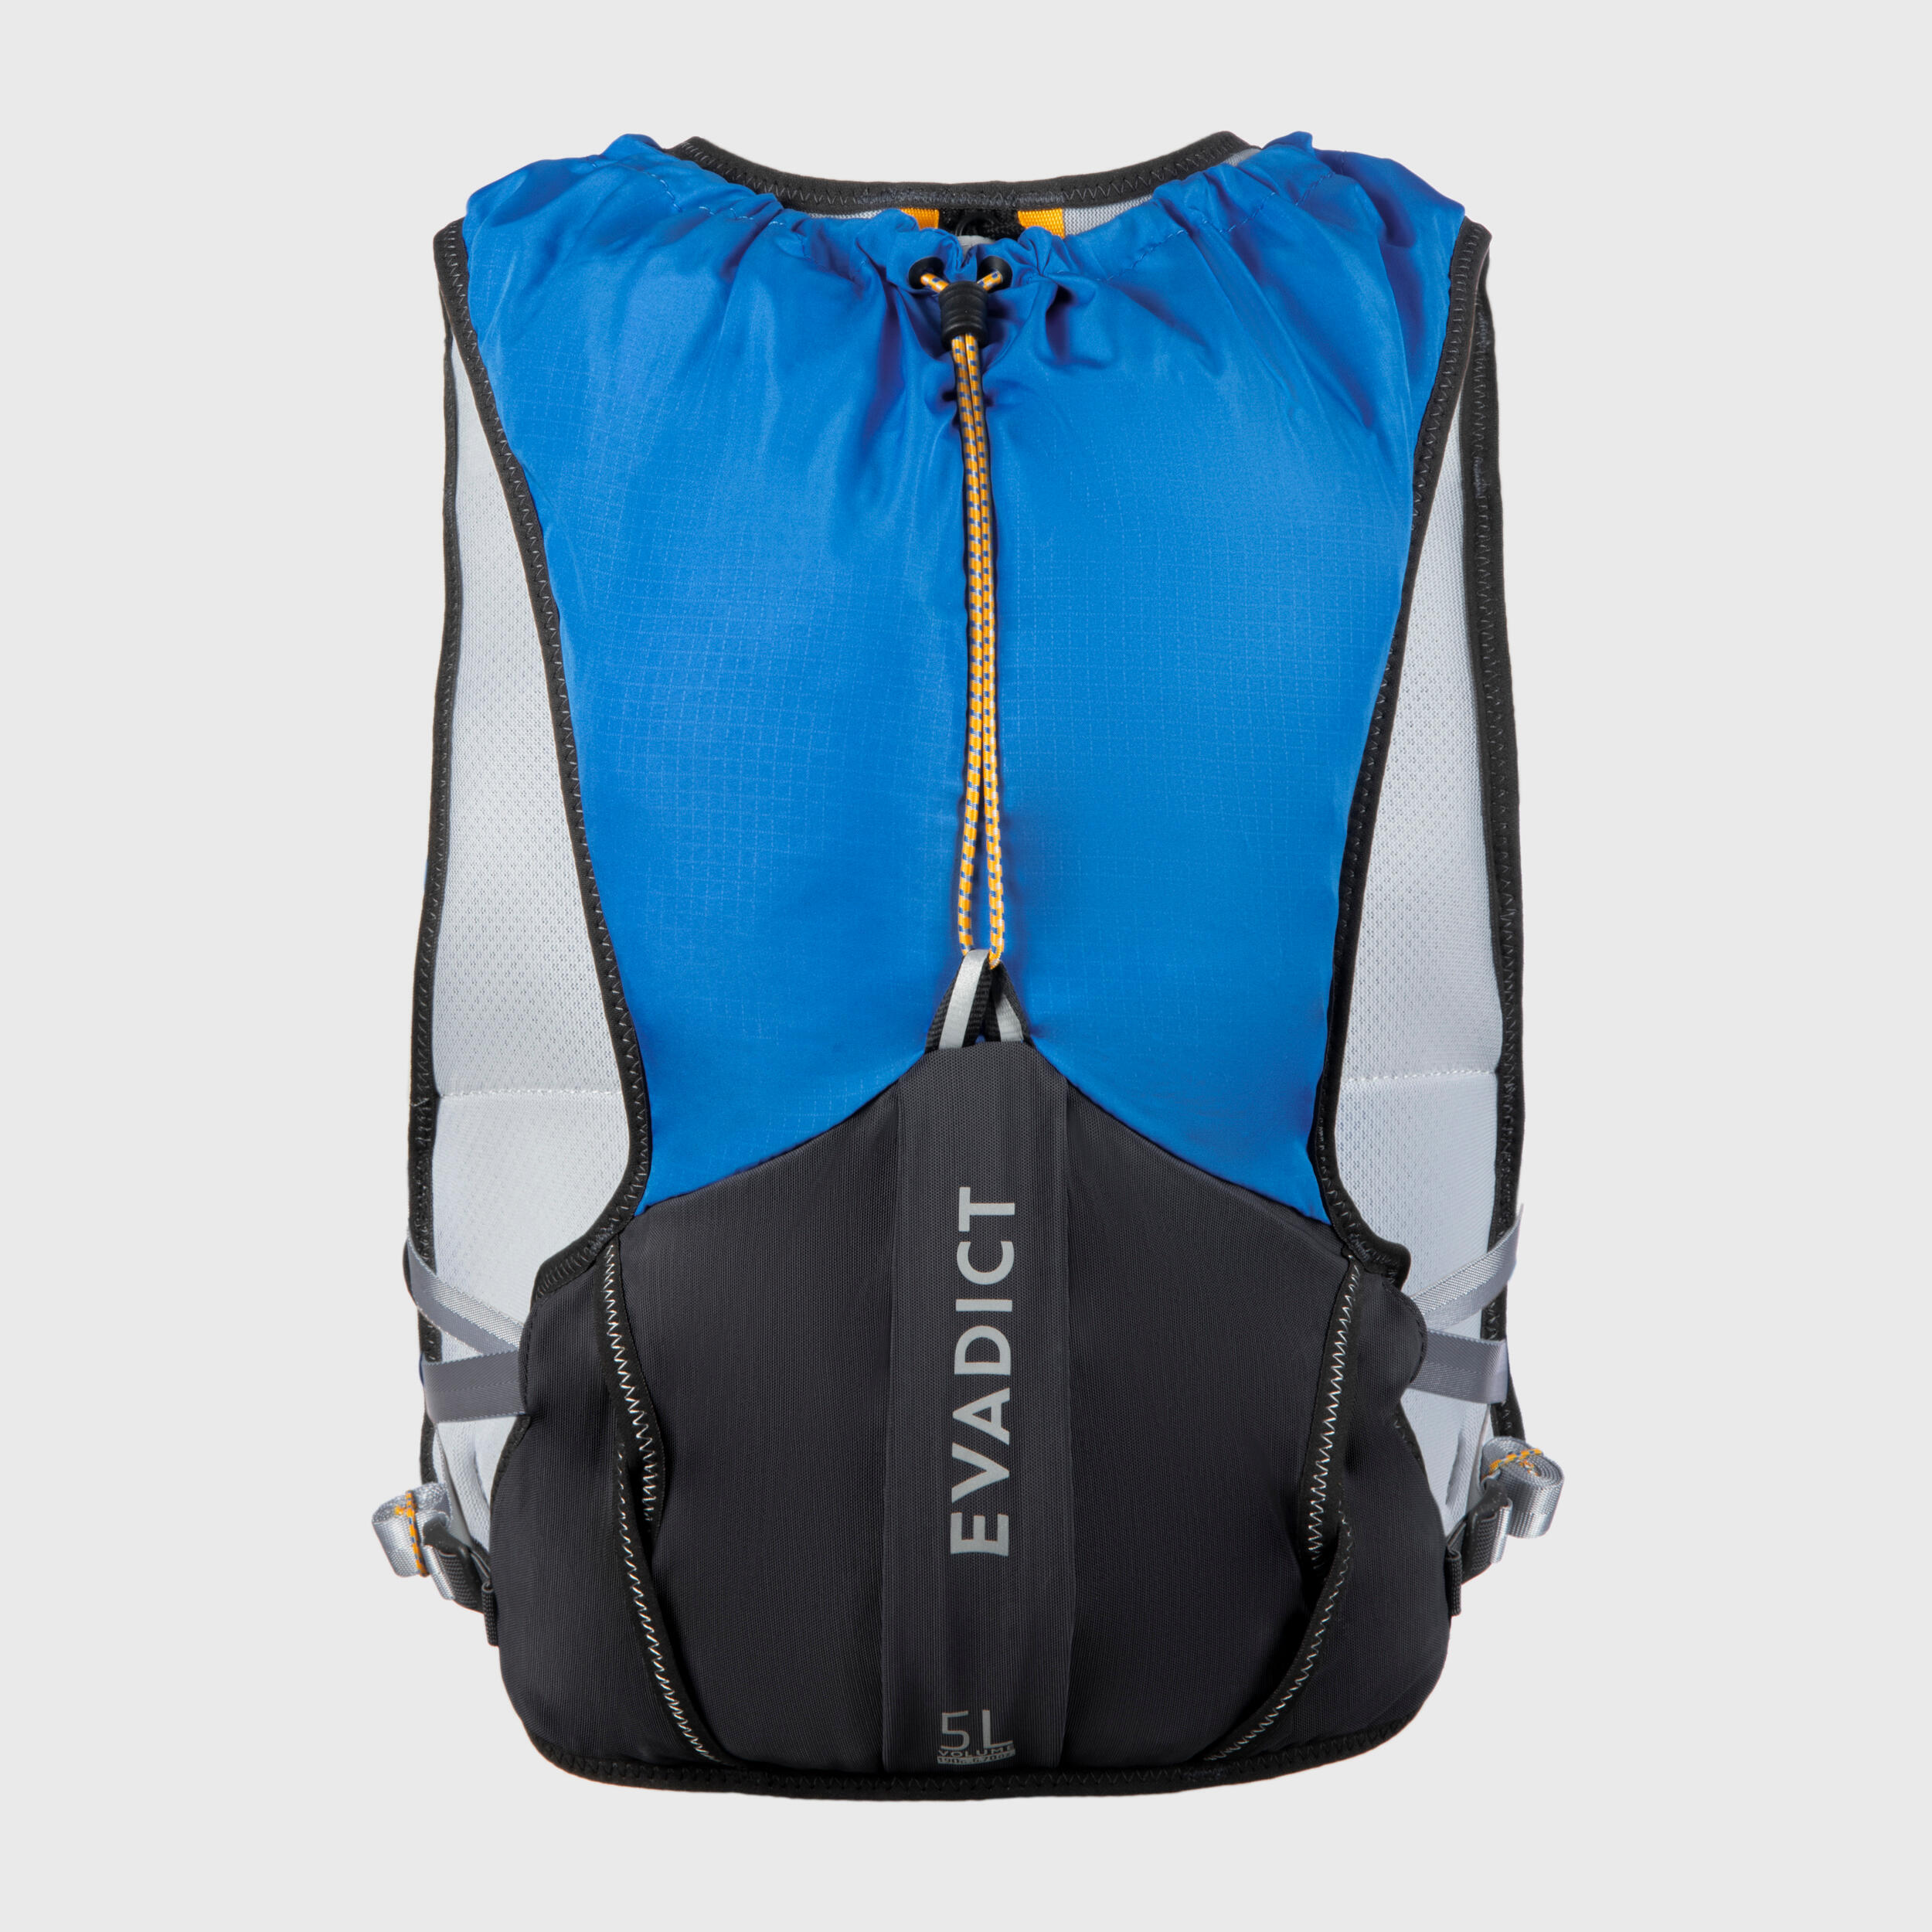 5L TRAIL RUNNING BAG - BLUE - SOLD WITH 1L WATER BLADDER 4/12